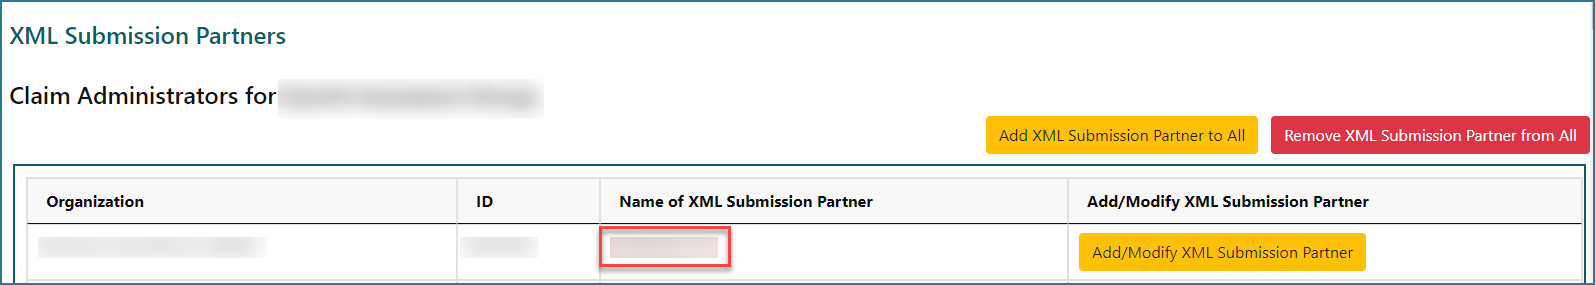 XML Submission Partners screen, Name of XML Submission Partner highlighted